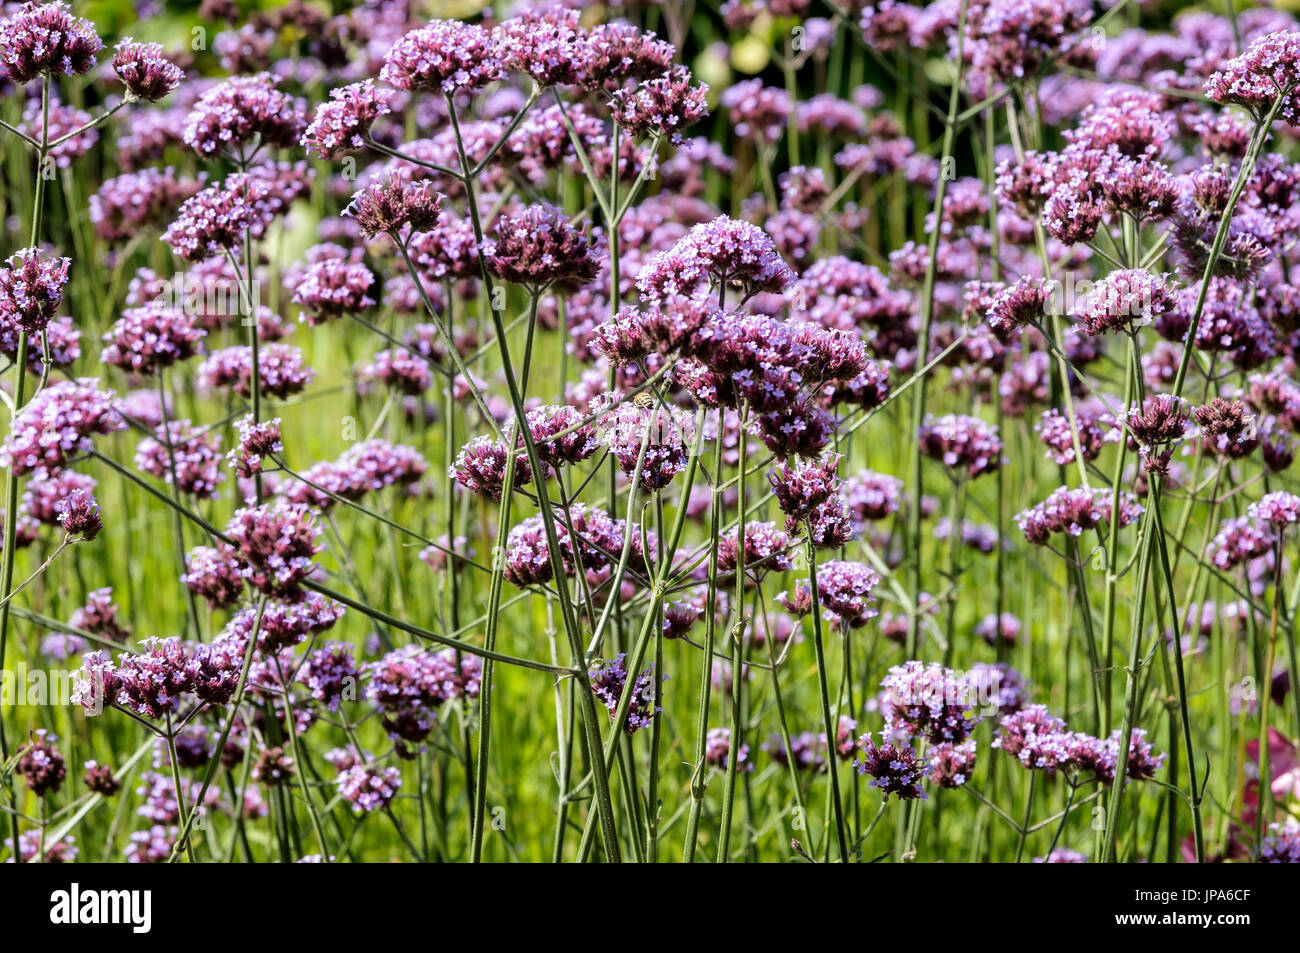 Natural Science, Small depth of sharpness, verbena flowers Stock Photo